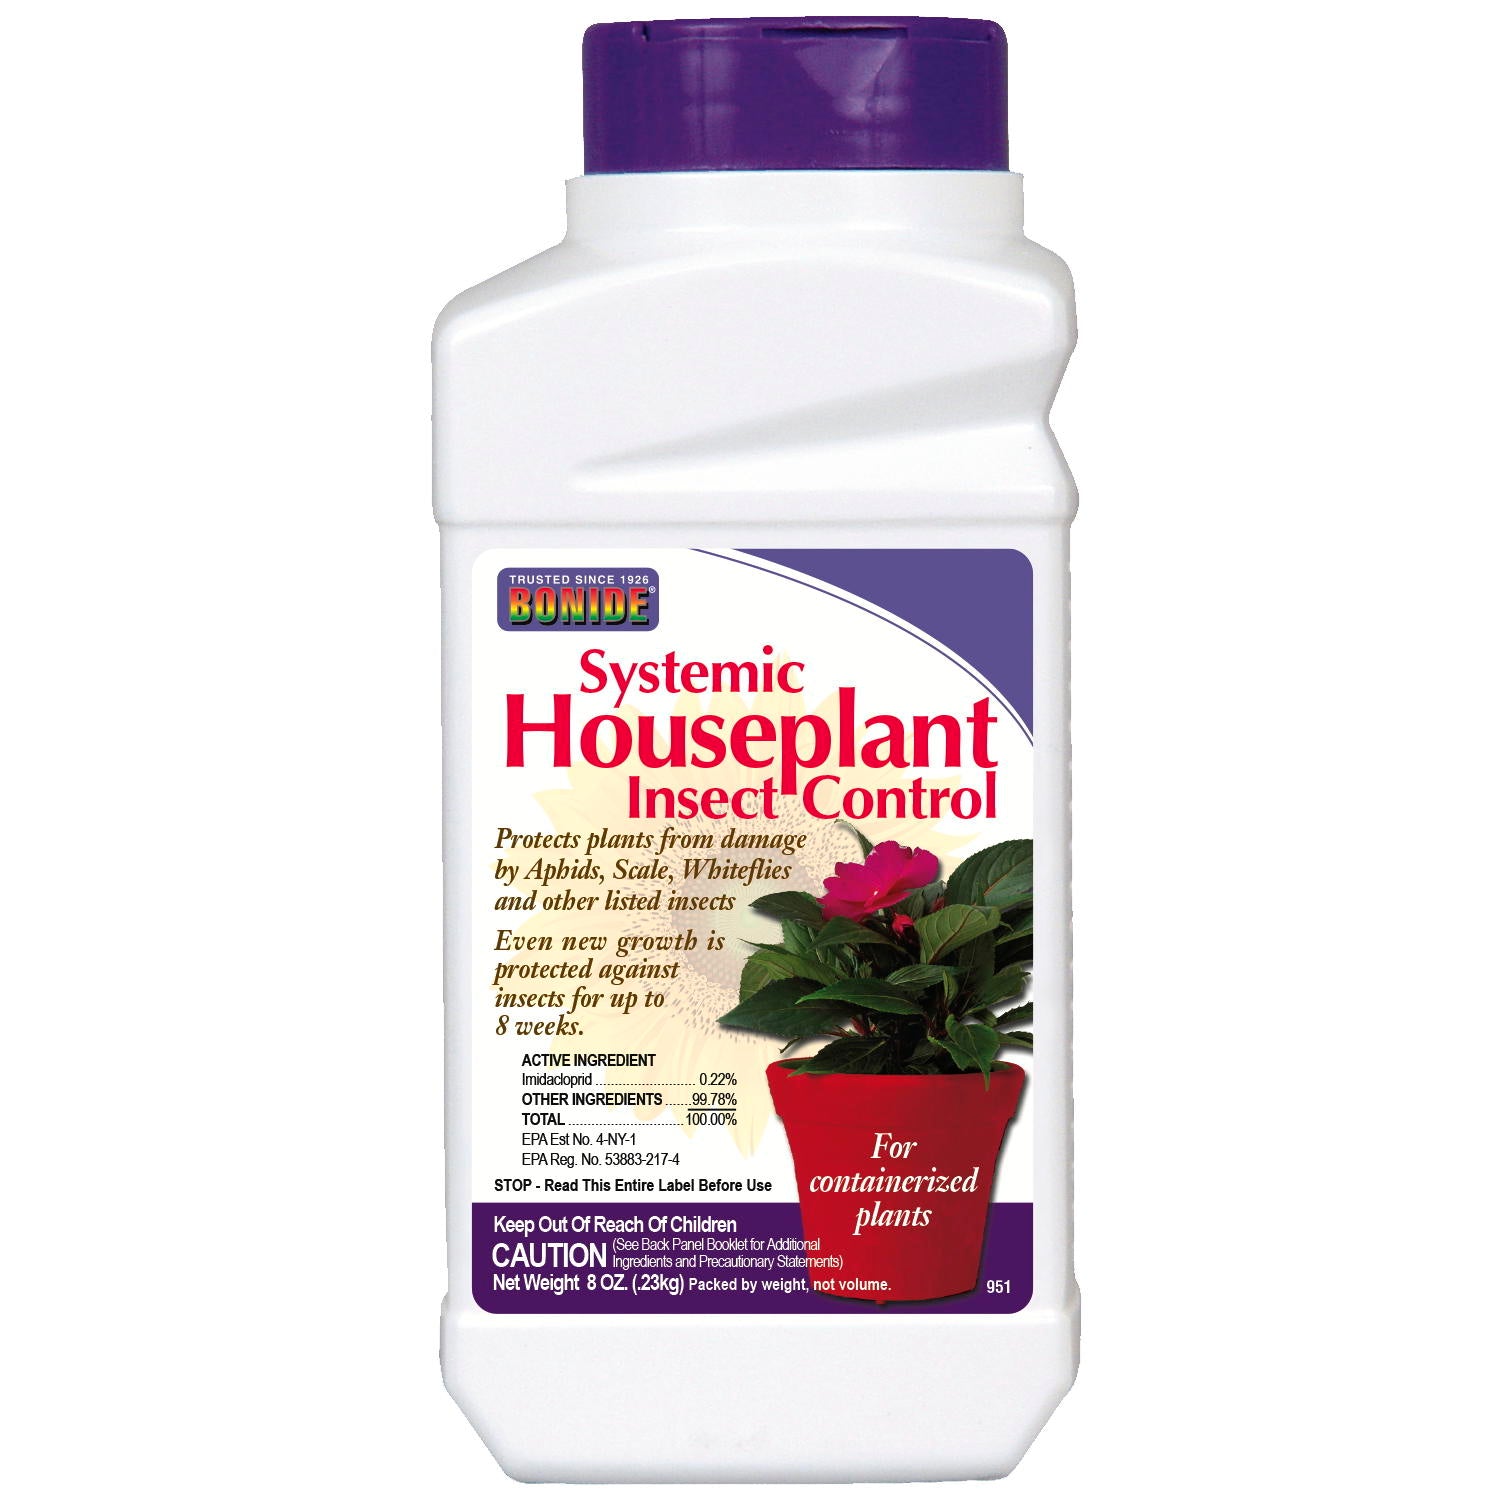 Houseplant granules great to prevent fungus gnats, whiteflies and more